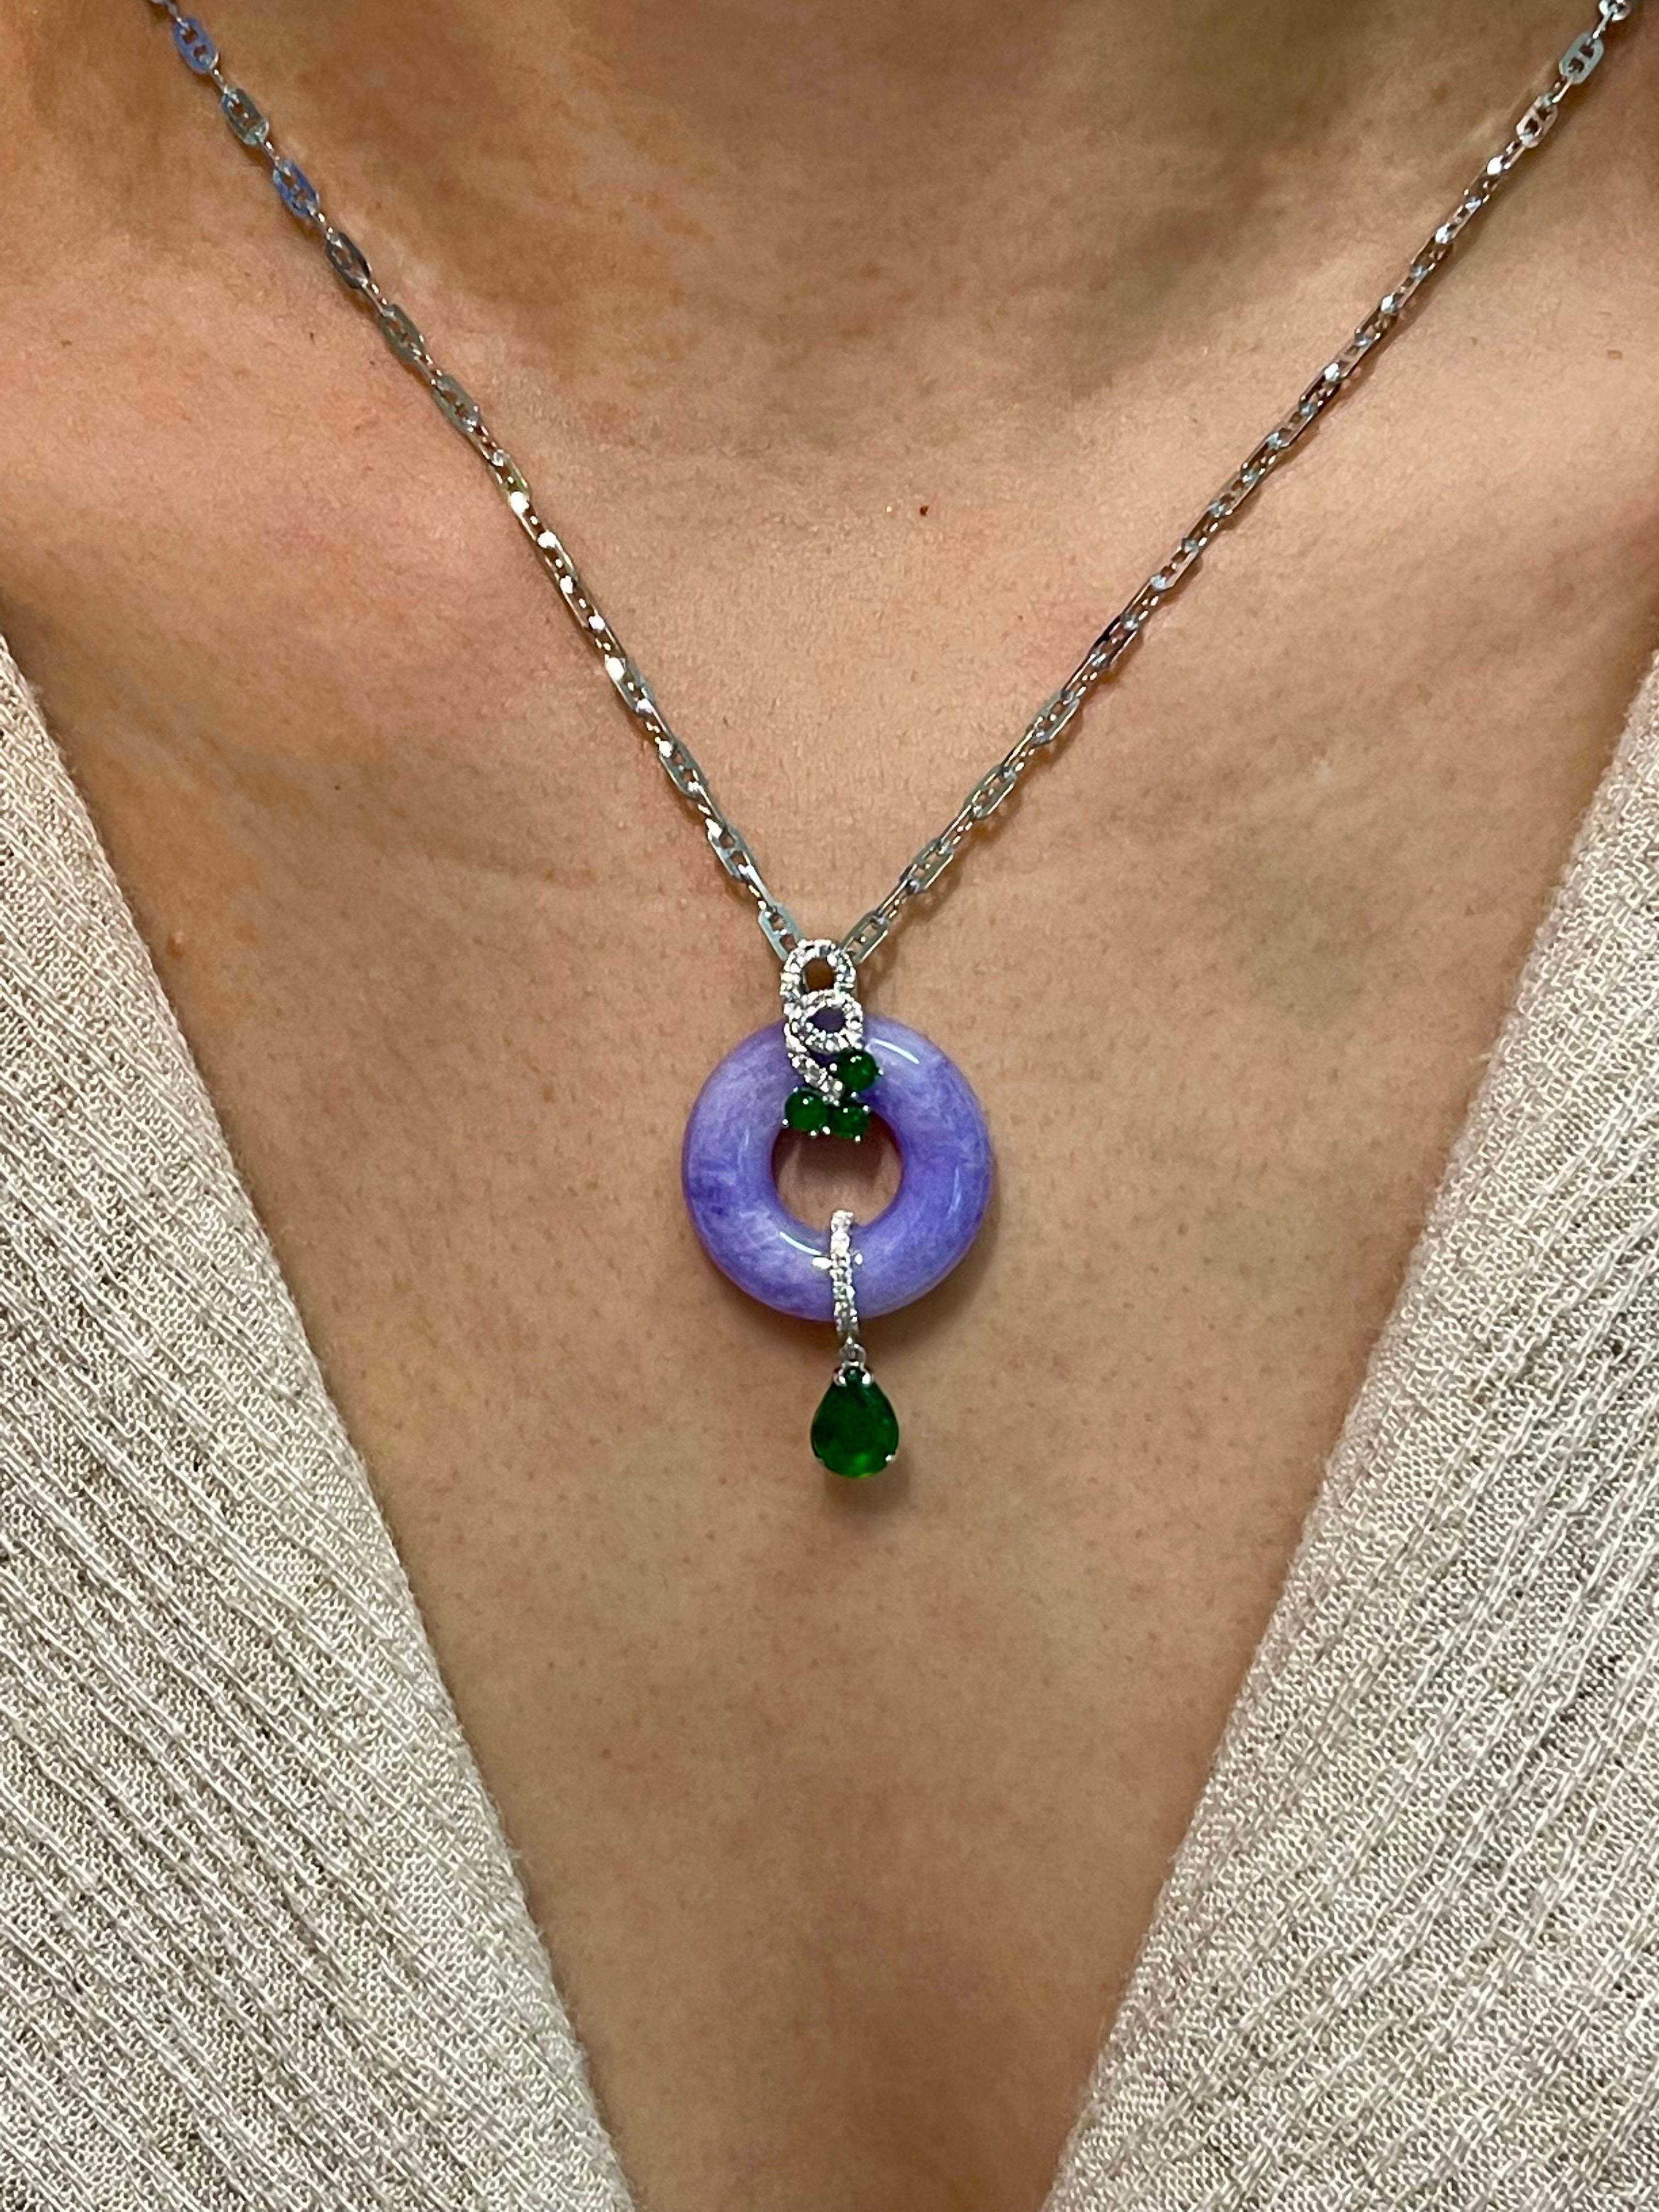 Please check out the HD video! This certified natural lavender jadeite is not common in this size and concentration of color. It is as beautiful from the front as it is from the back. The lavender jade donut (peace buckle) pendant is simple and